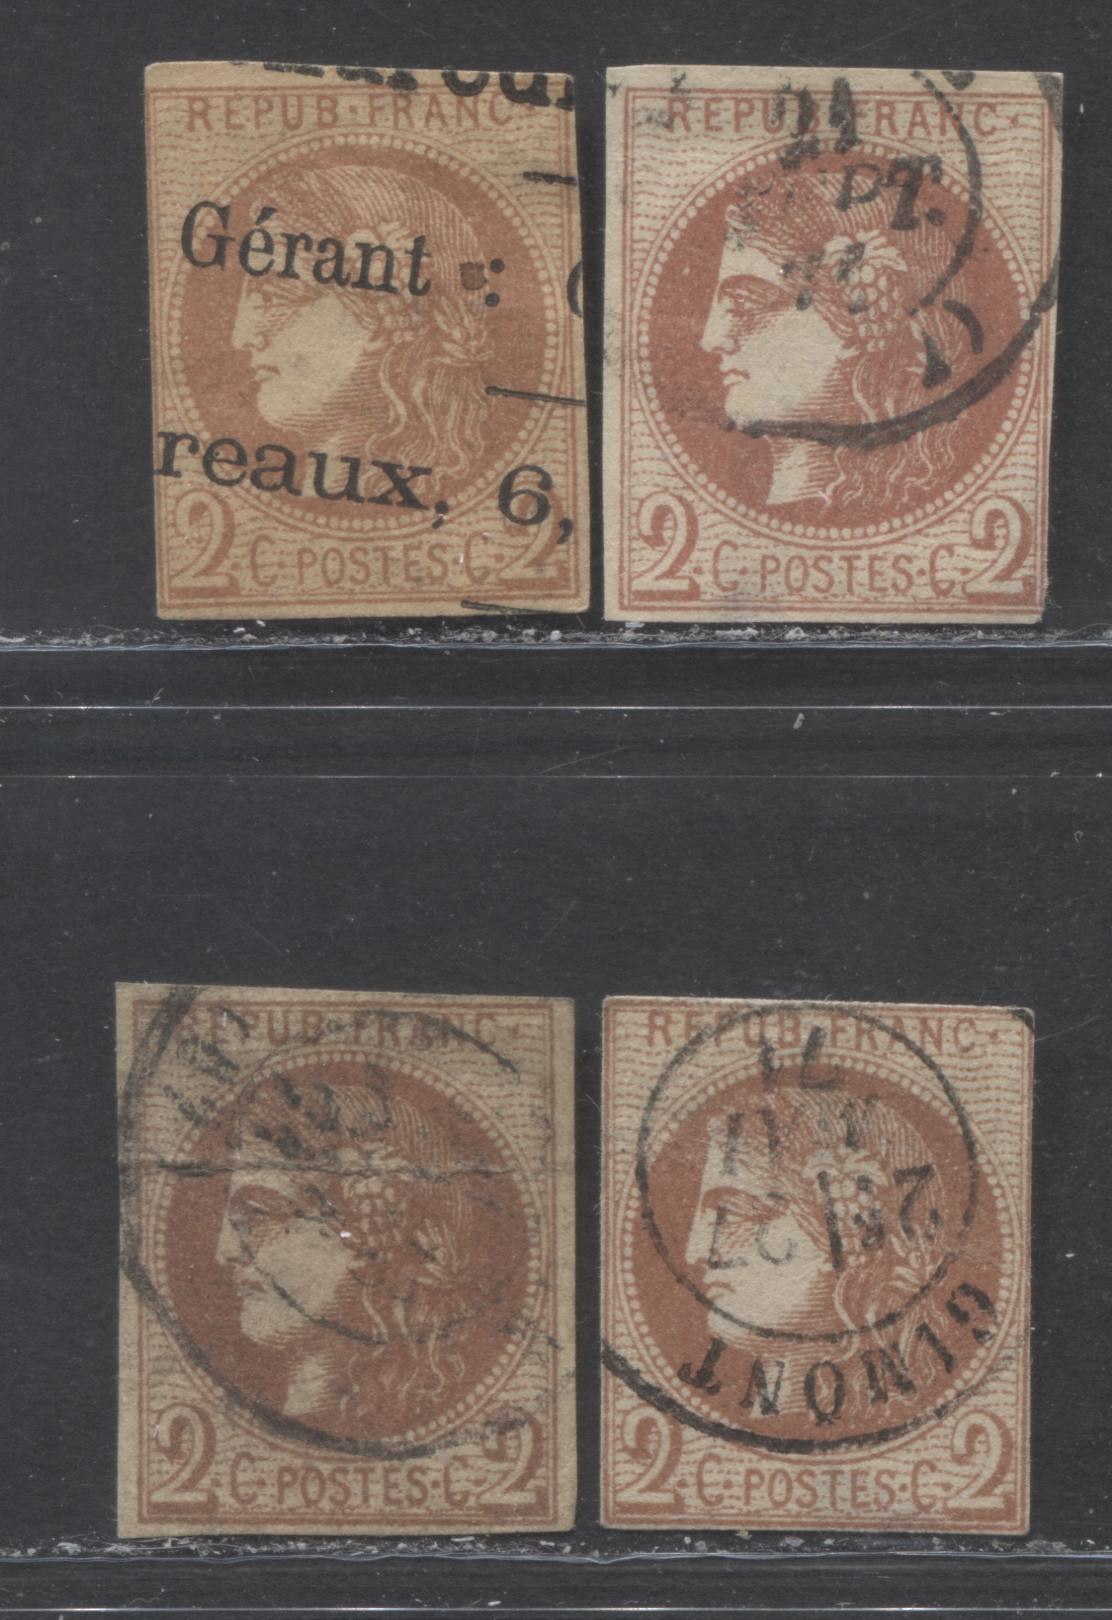 Lot 332 France SC#39 2c Red Brown 1870-1871 Imperf Bordeaux Definitive Issue, A Ungraded Study Lot, 2022 Scott Classic Cat. $900 USD, Net Est. $45, Click on Listing to See ALL Pictures